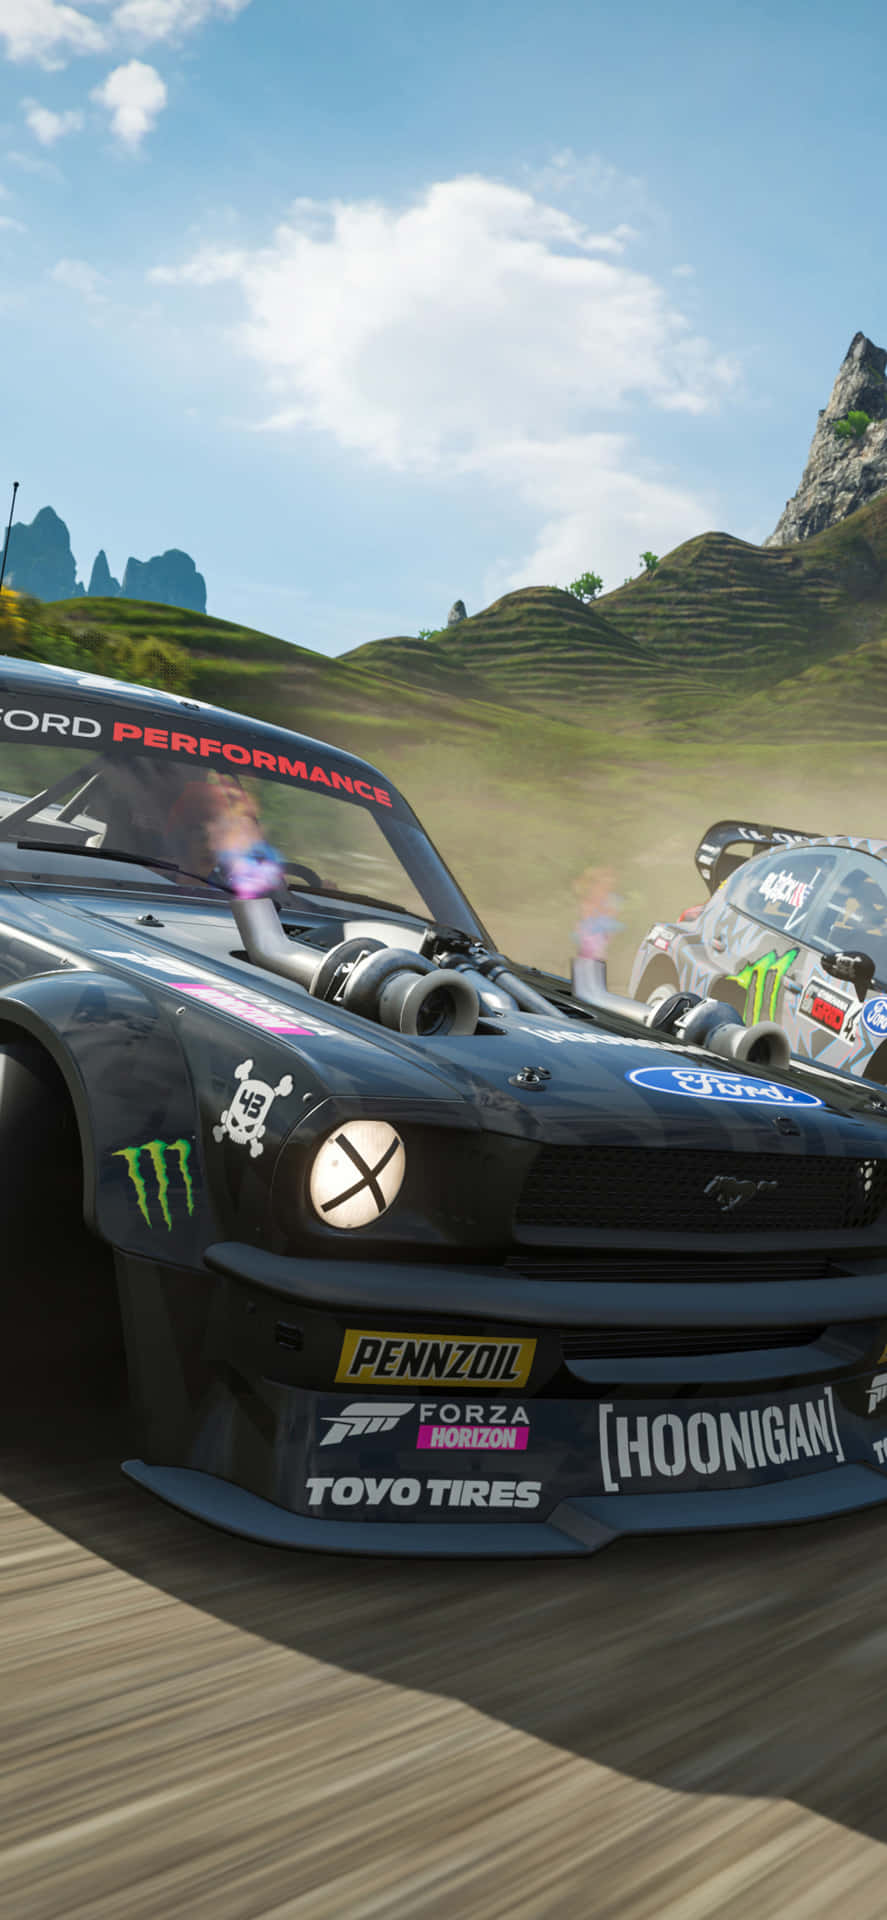 Drive and explore the incredible landscapes of Forza Horizon 4 on the amazing Iphone X